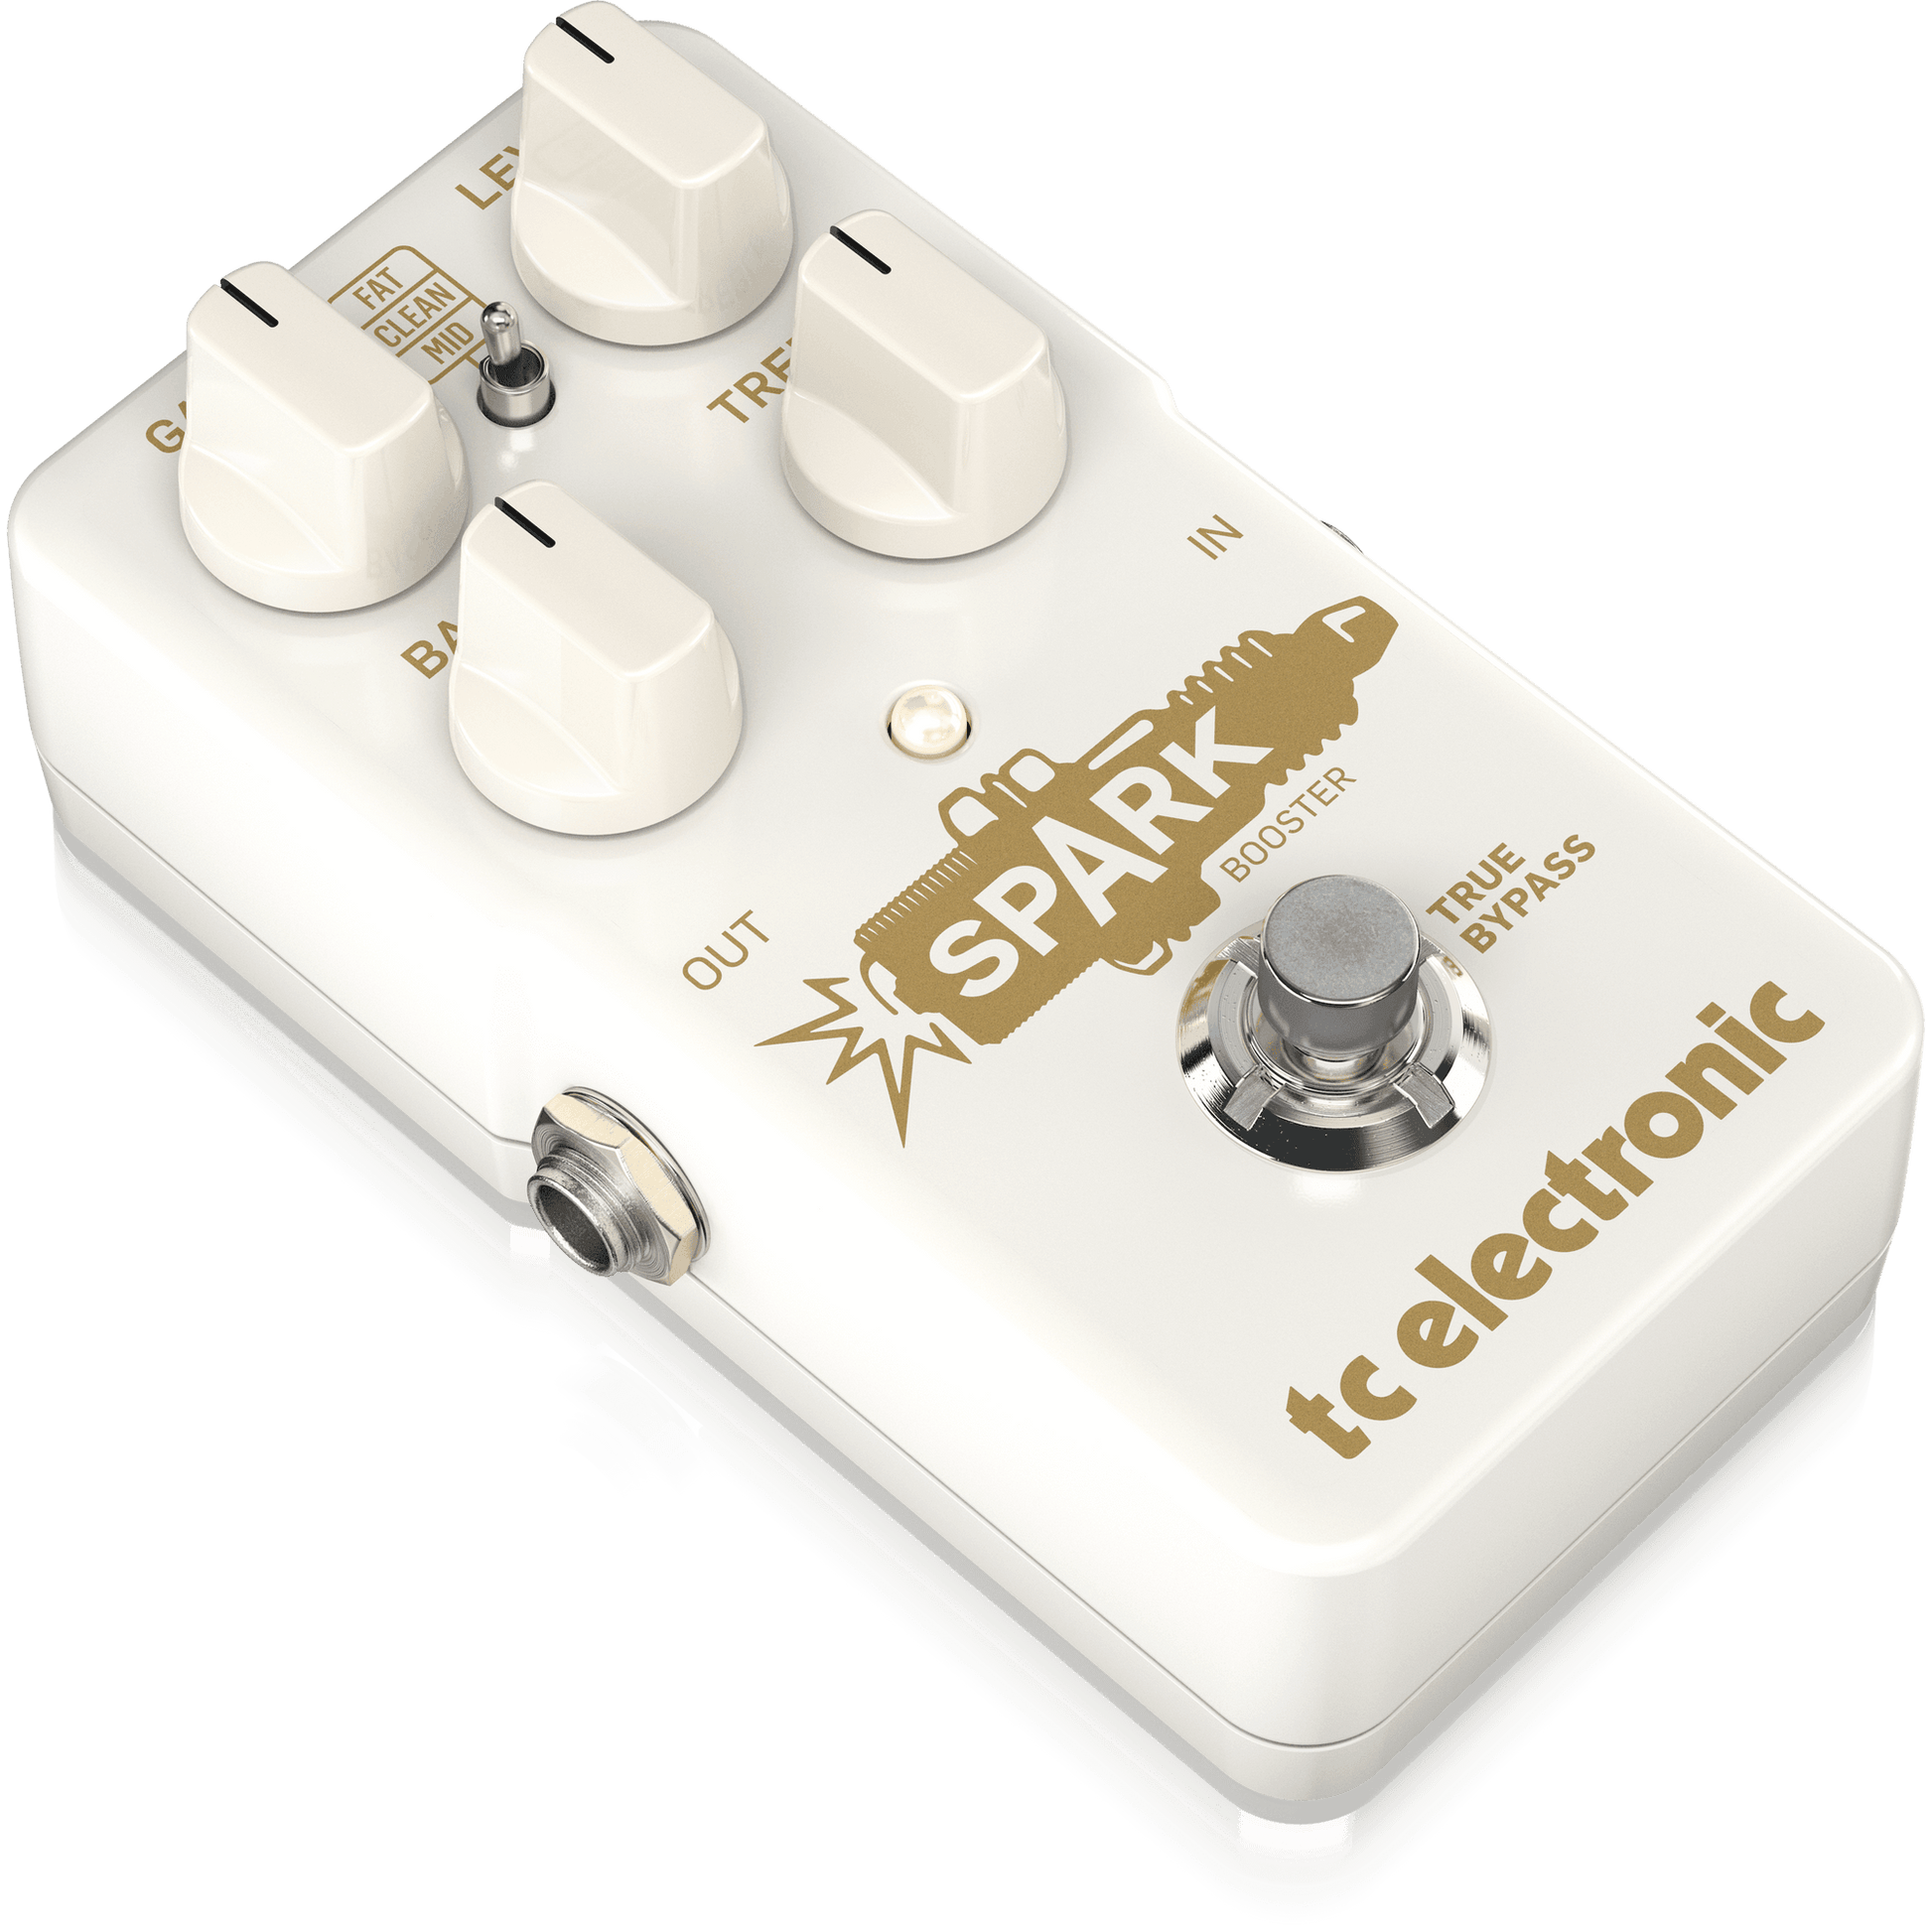 TC Electronic SPARK BOOSTER